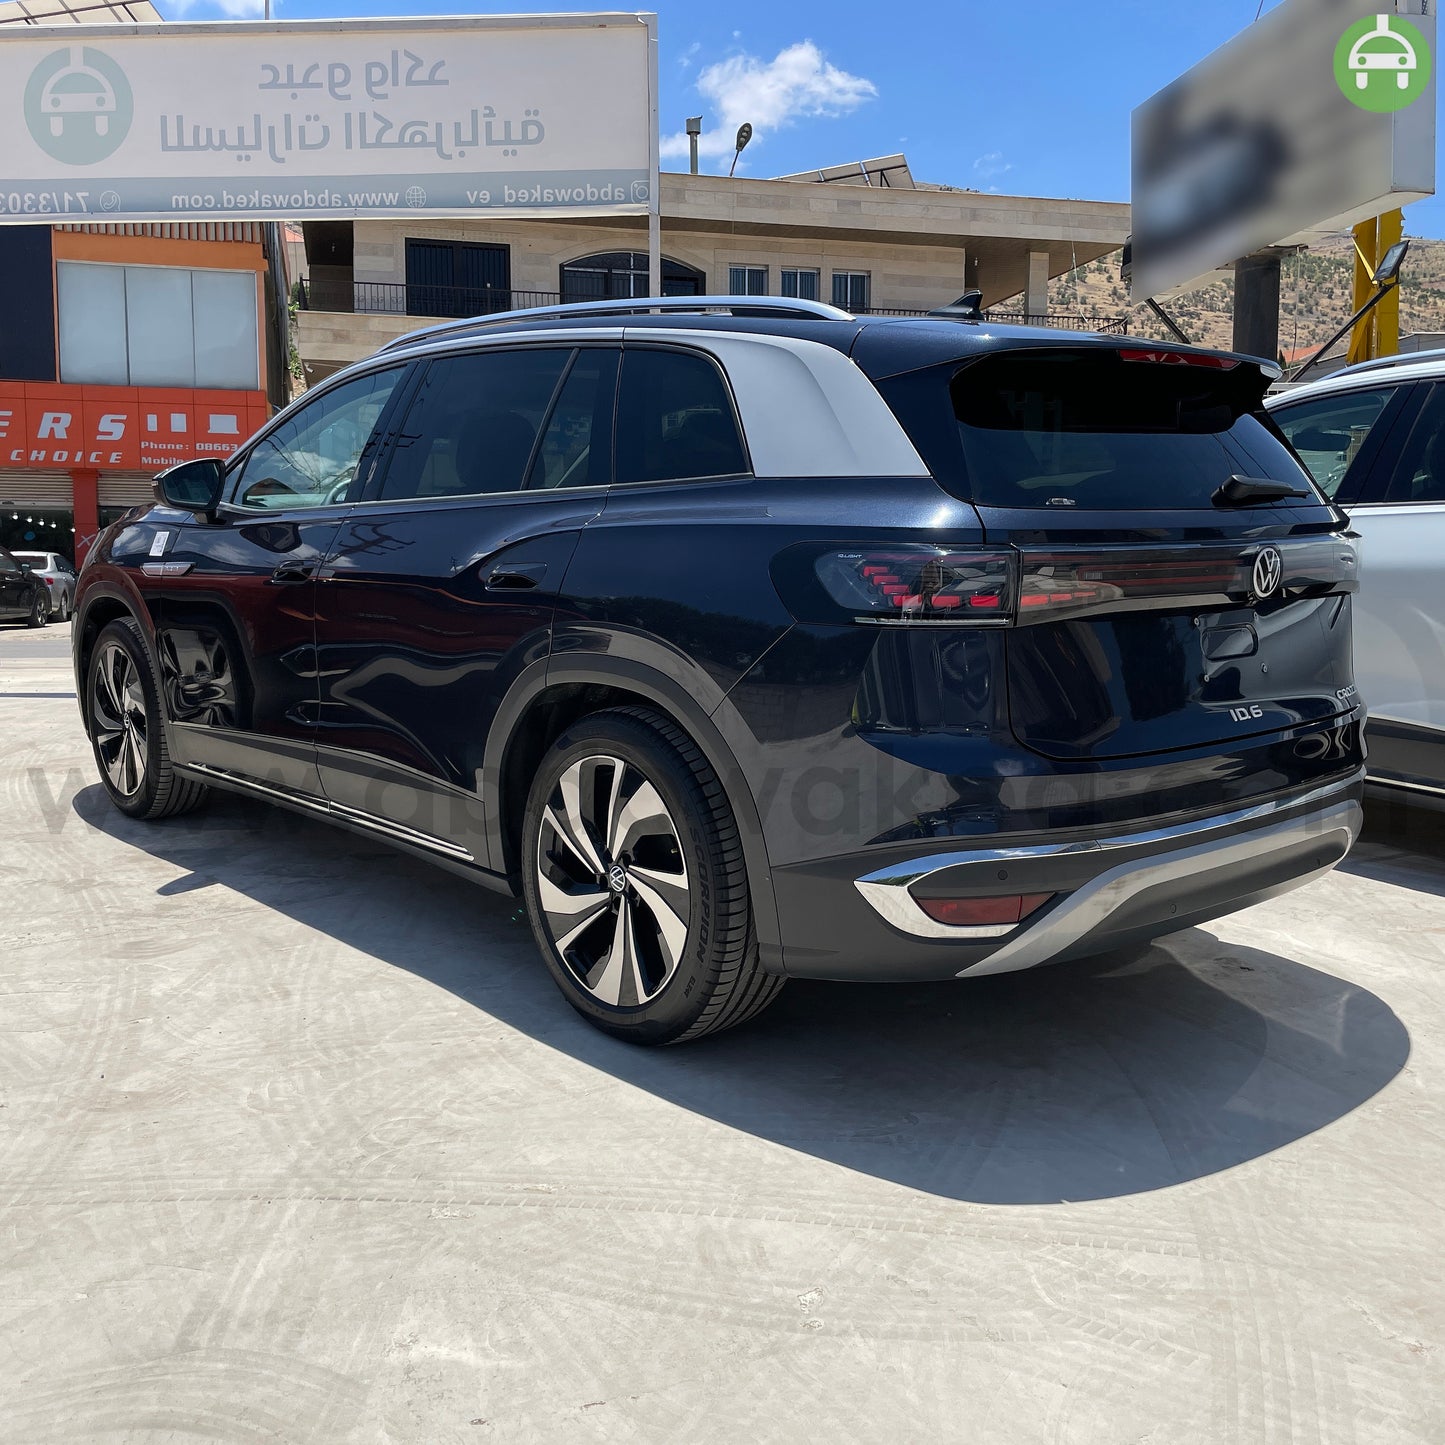 VW ID6 Crozz Pure+ 2022 7-Seater Dark Blue Color 550km Range/Charge Fully Electric Car (New - 0KM)